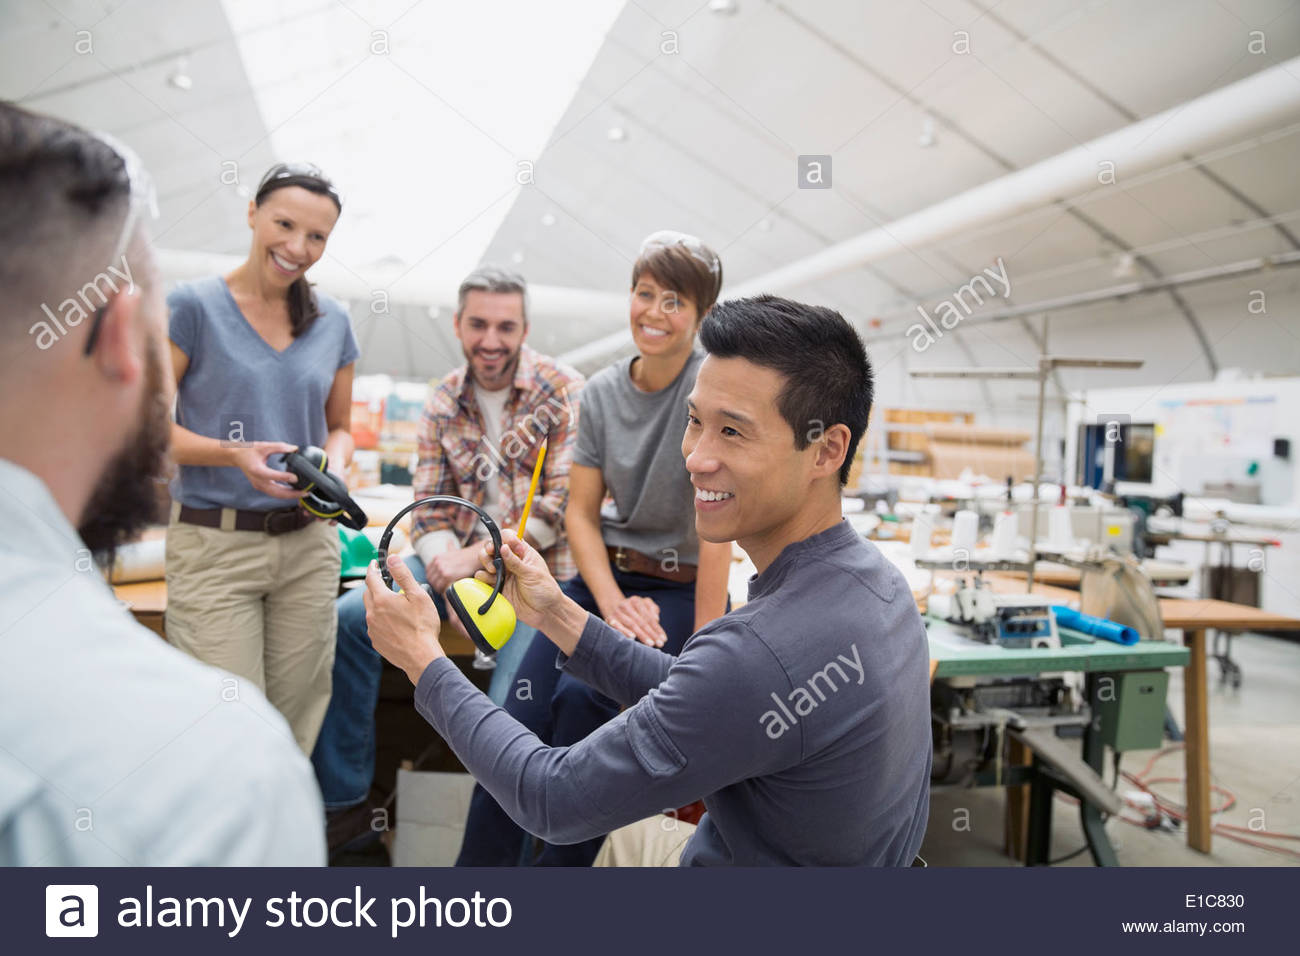 Workers with ear protectors in textile manufacturing plant Stock Photo